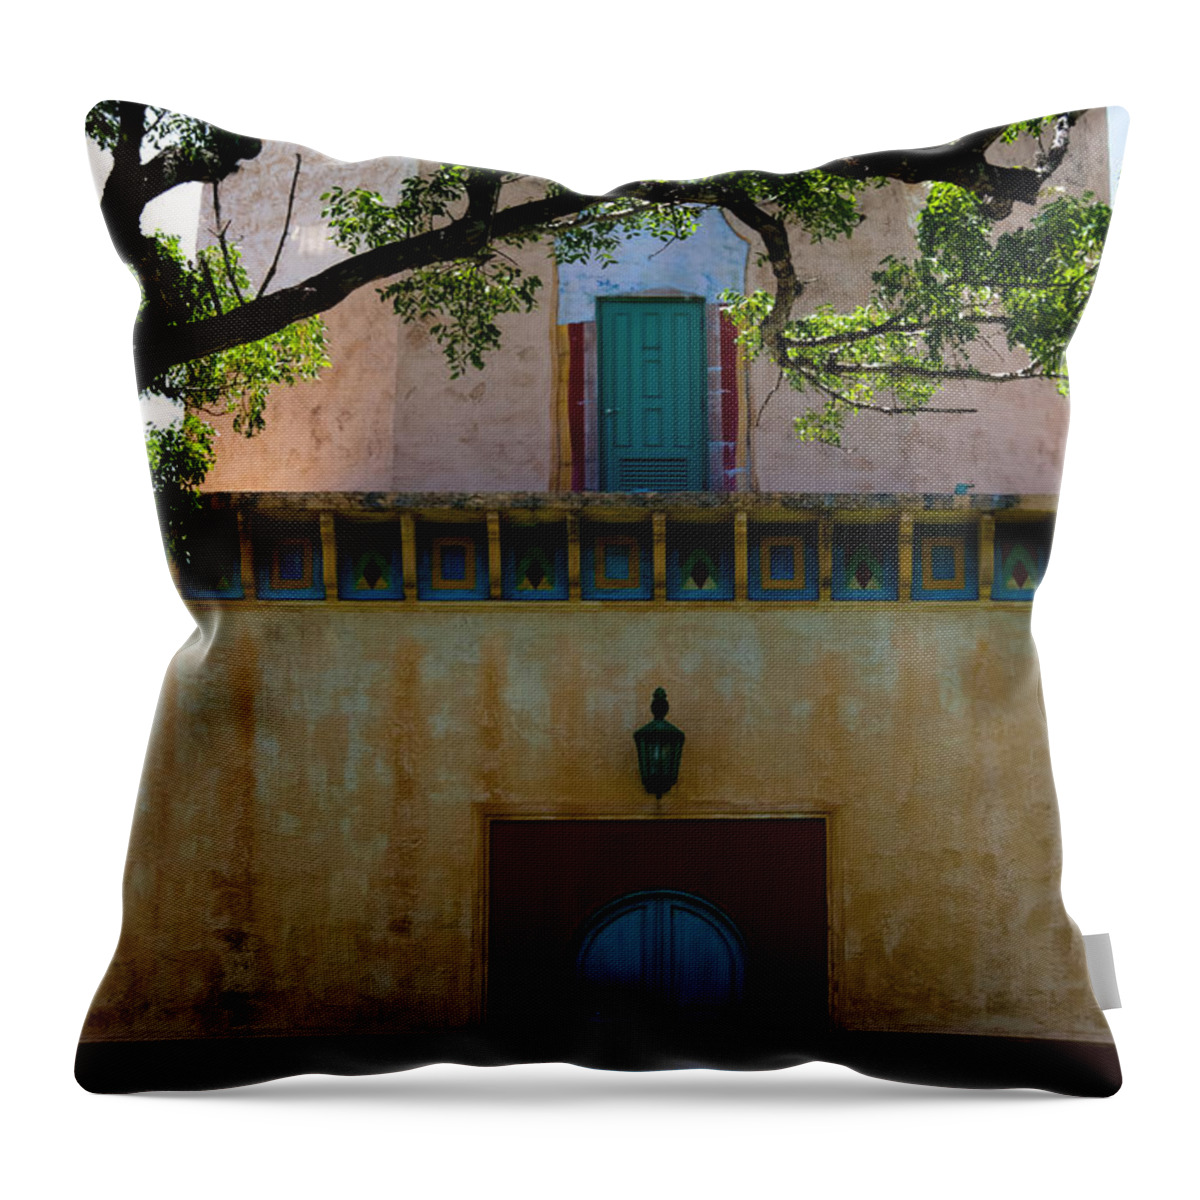 Alhambra Water Tower Throw Pillow featuring the photograph Alhambra Water Tower Doors by Ed Gleichman